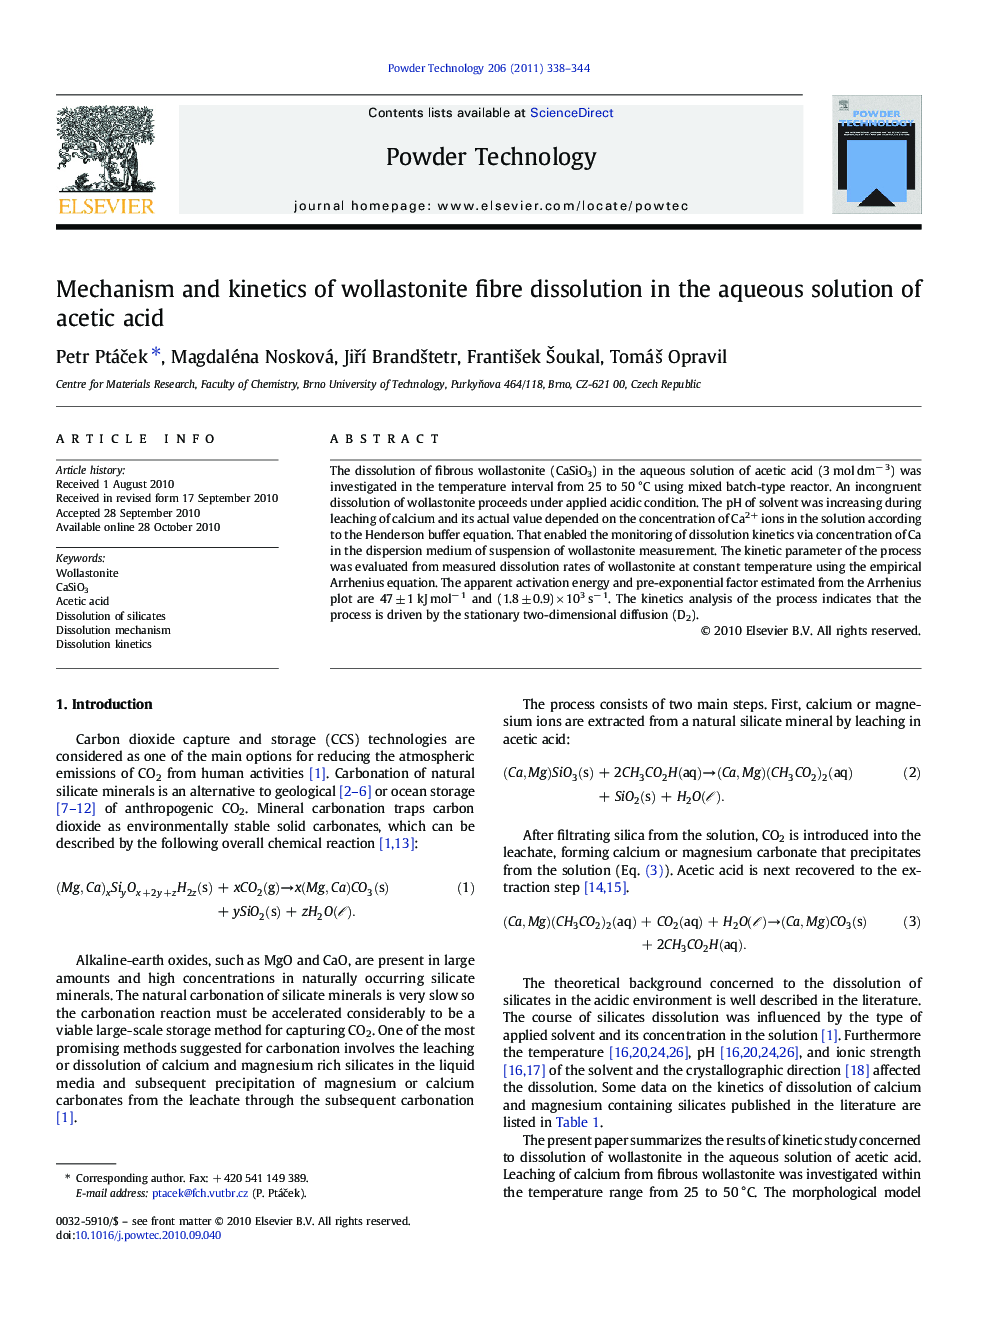 Mechanism and kinetics of wollastonite fibre dissolution in the aqueous solution of acetic acid